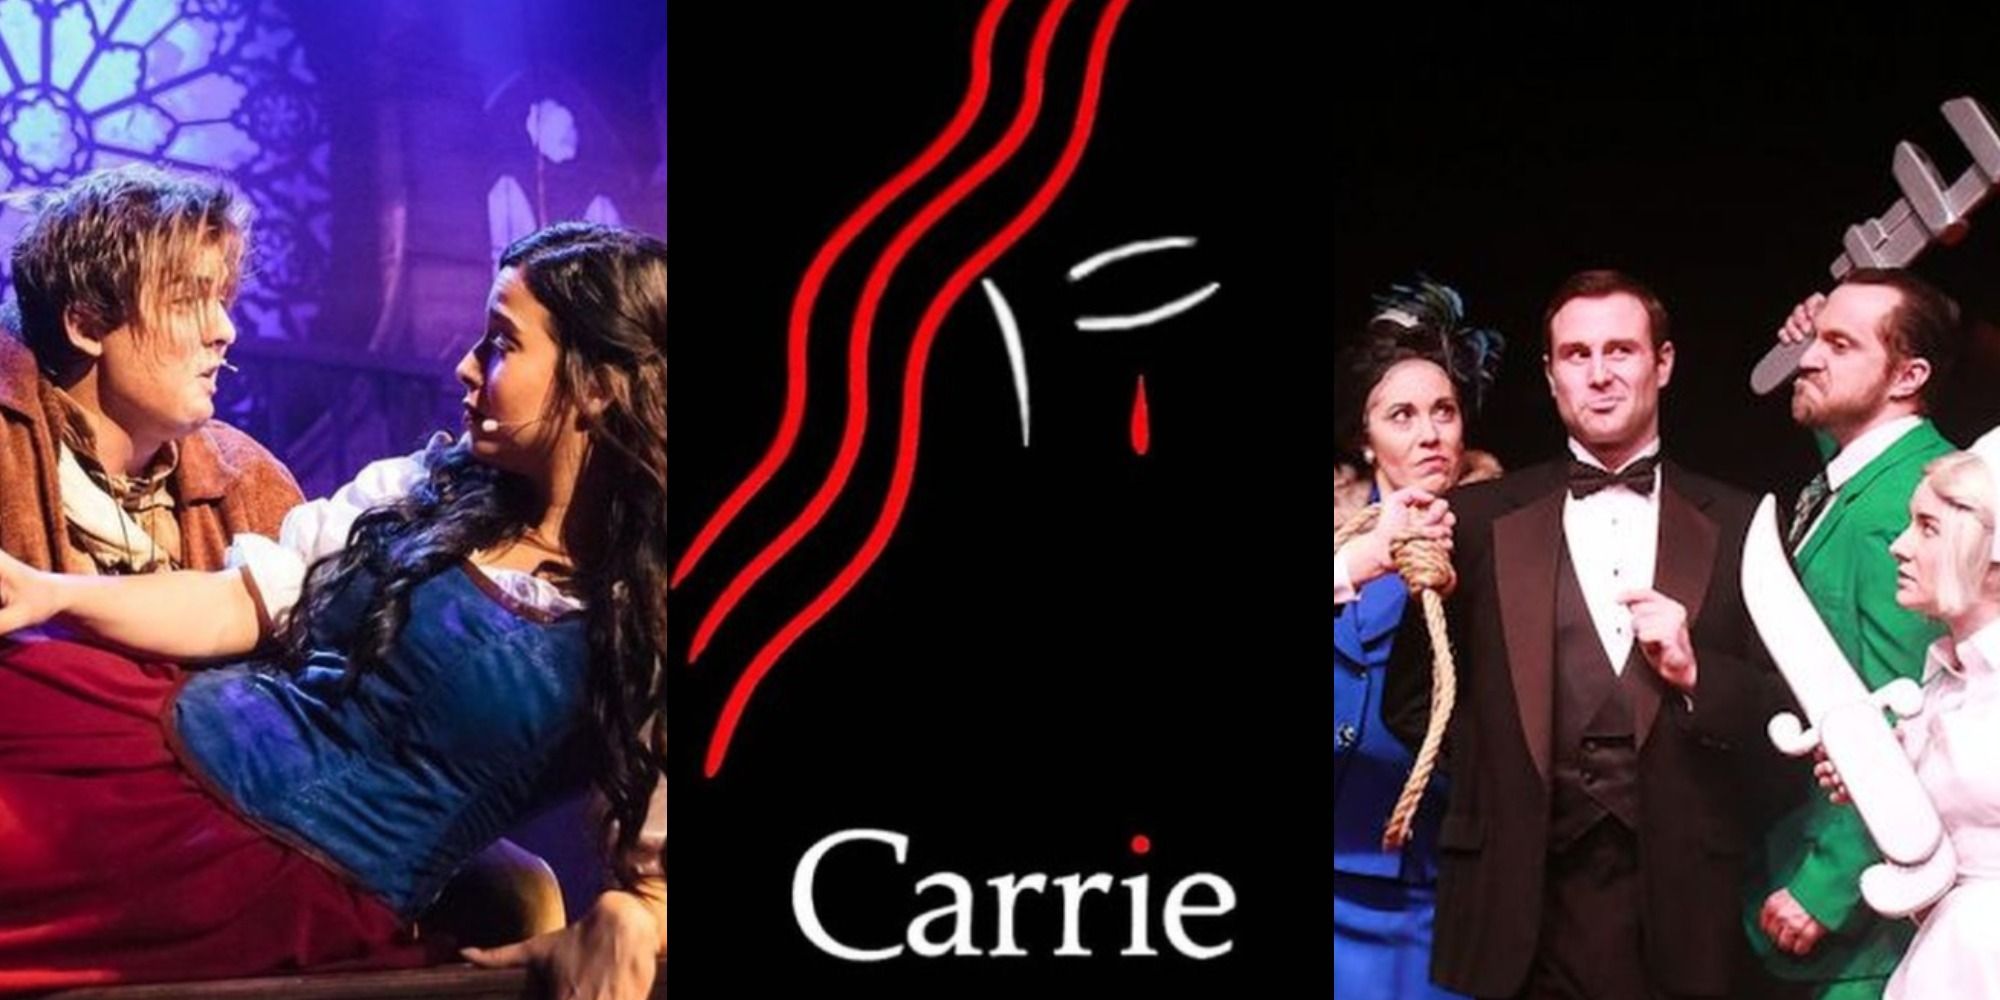 Collage of images from The Hunchback of Notre Dame, Carrie and Clue musicals